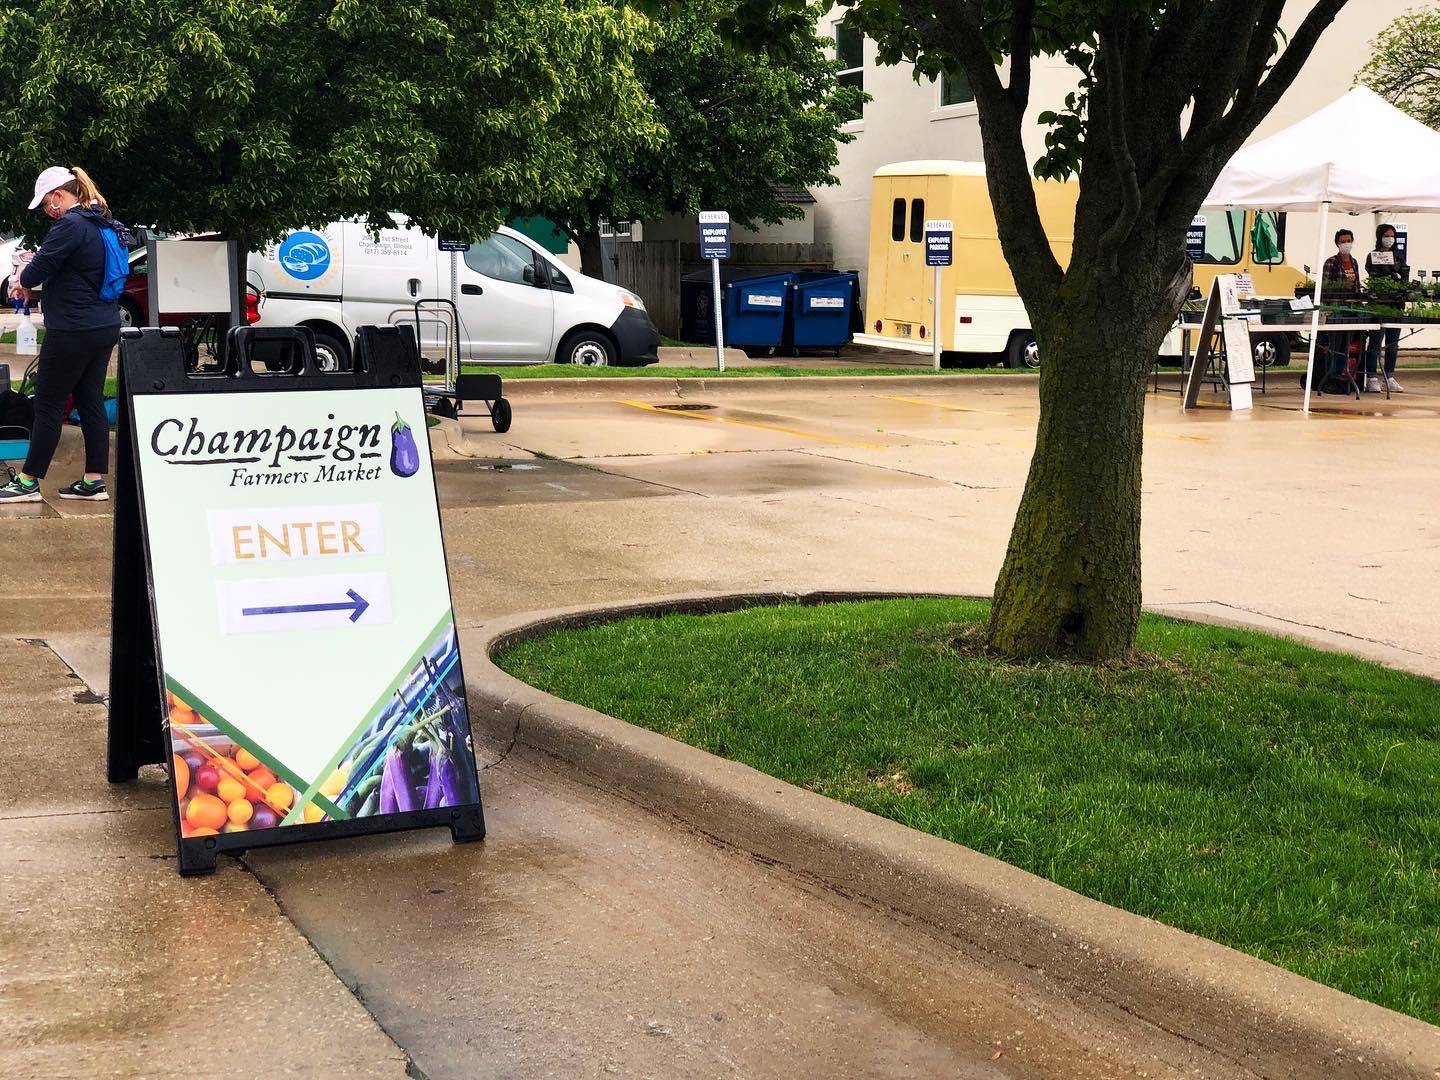 The entrance sign for the Champaign Farmers' Market sits on a parking lot point the direction for social distancing shopping. Photo by Alyssa Buckley.